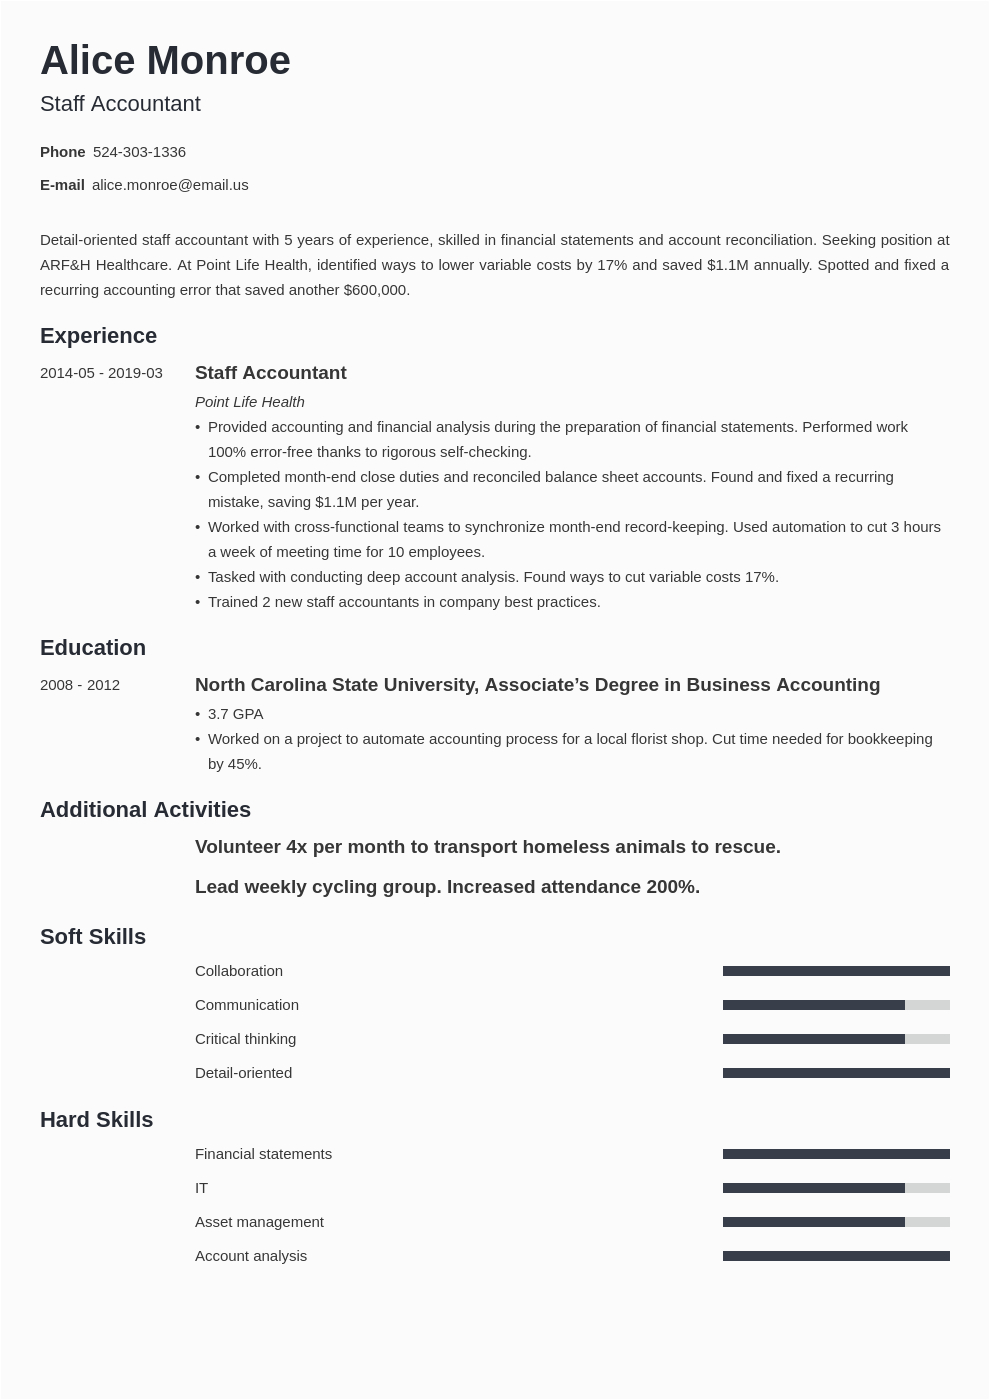 Sample Resume for Staff Accountant Position Staff Accountant Resume Sample Guide & 20 Examples